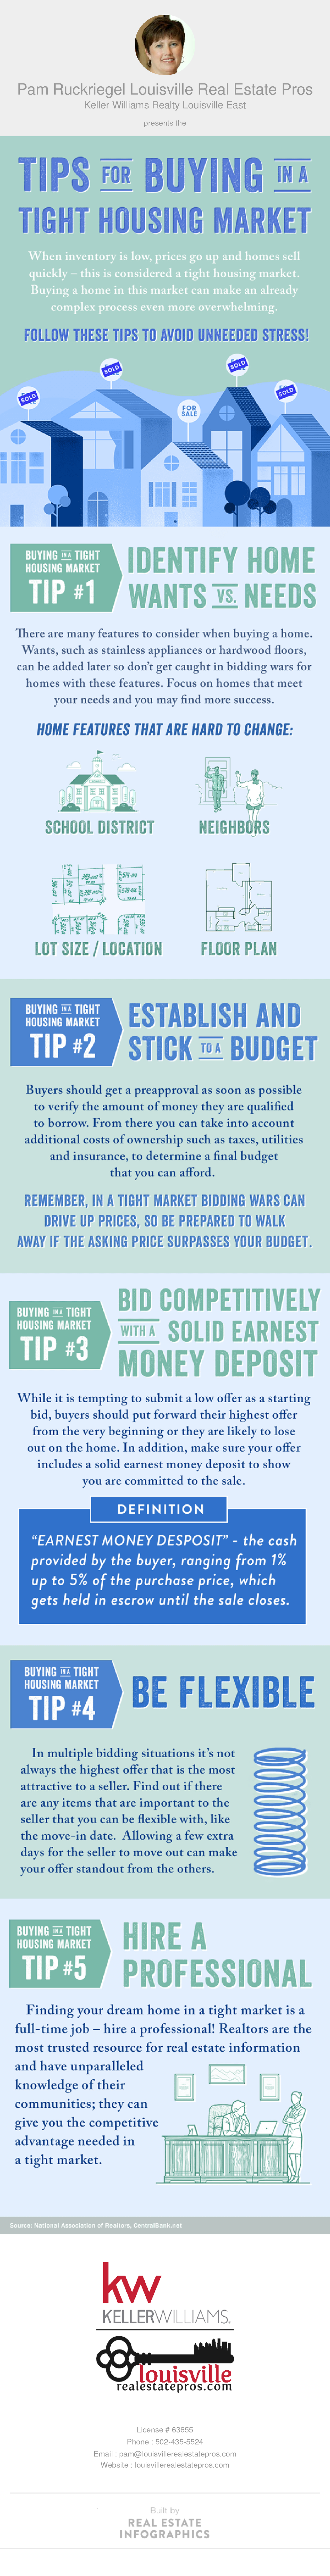 Tips for Buying in a Tight Housing Market